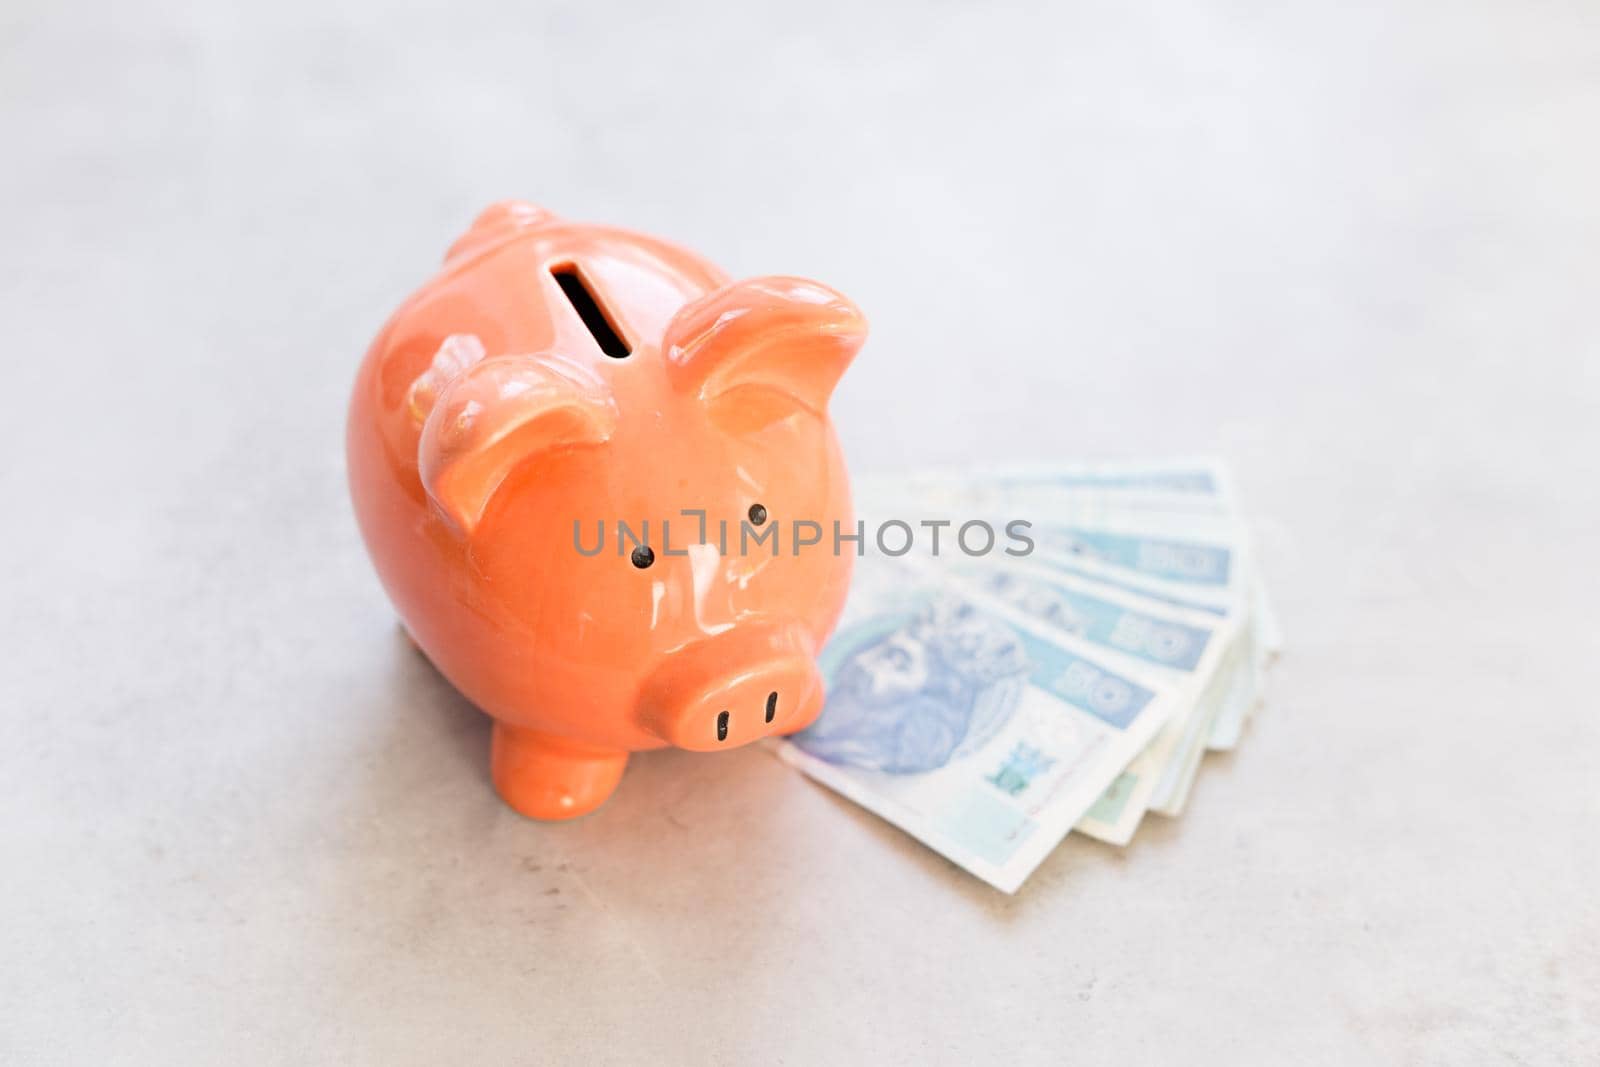 Piggy bank with polish paper money on concrete table - business or financial concept in vertical banner by ingalinder